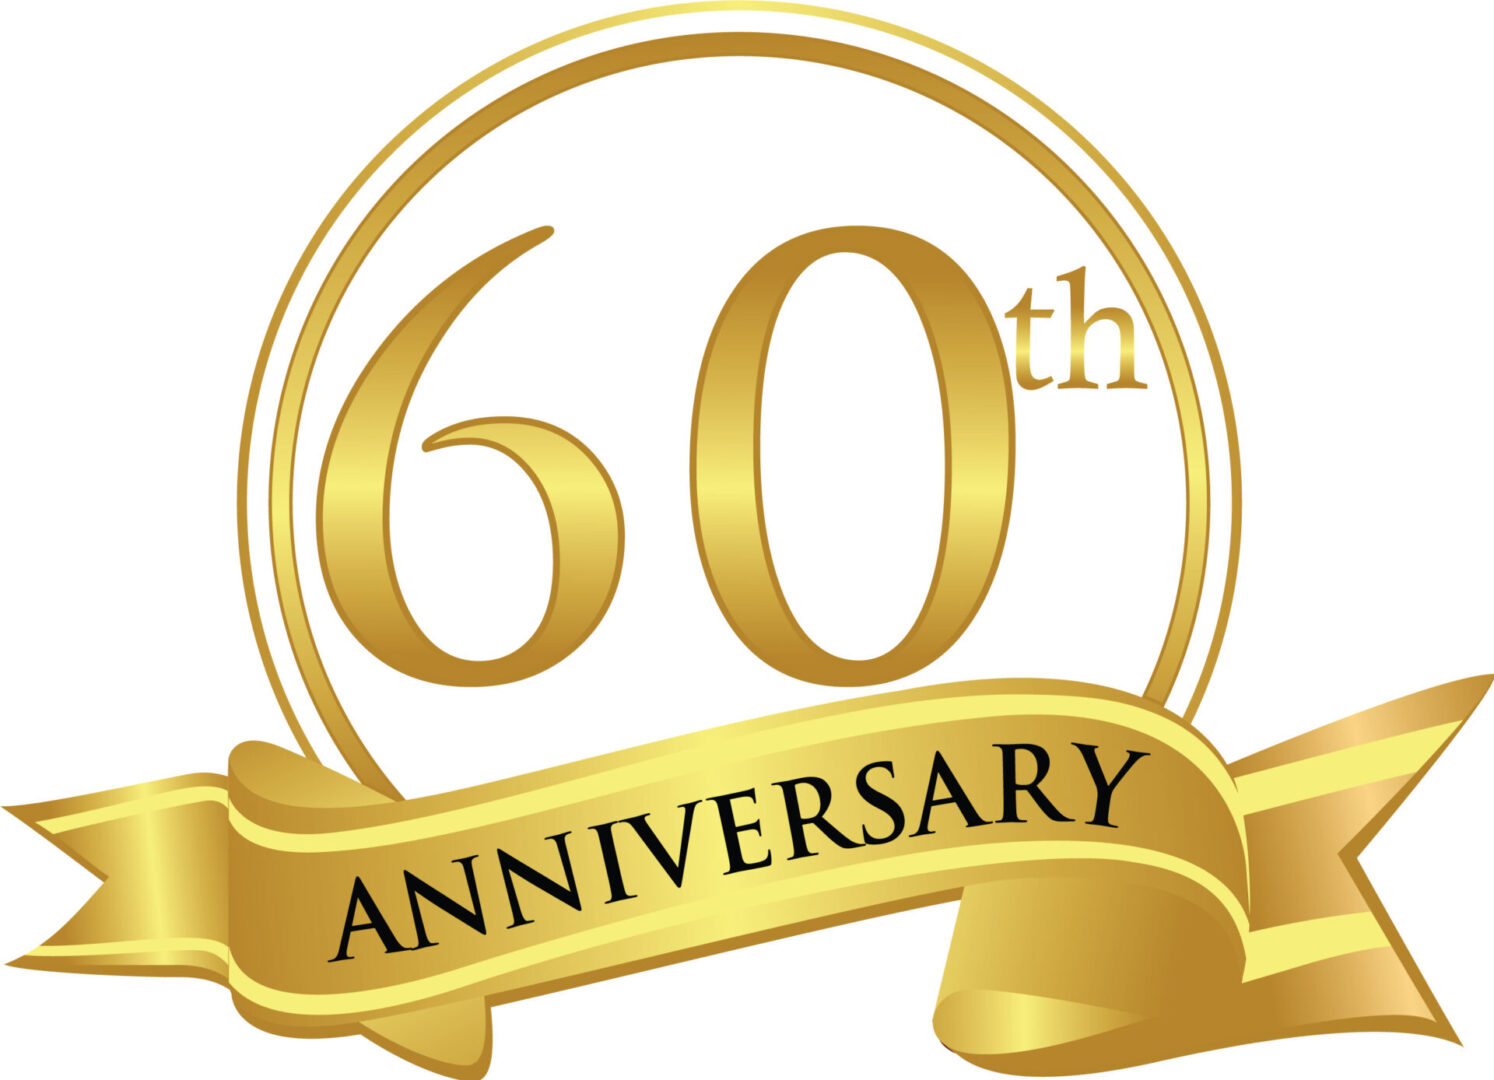 A golden 6 0 th anniversary sign with a ribbon.